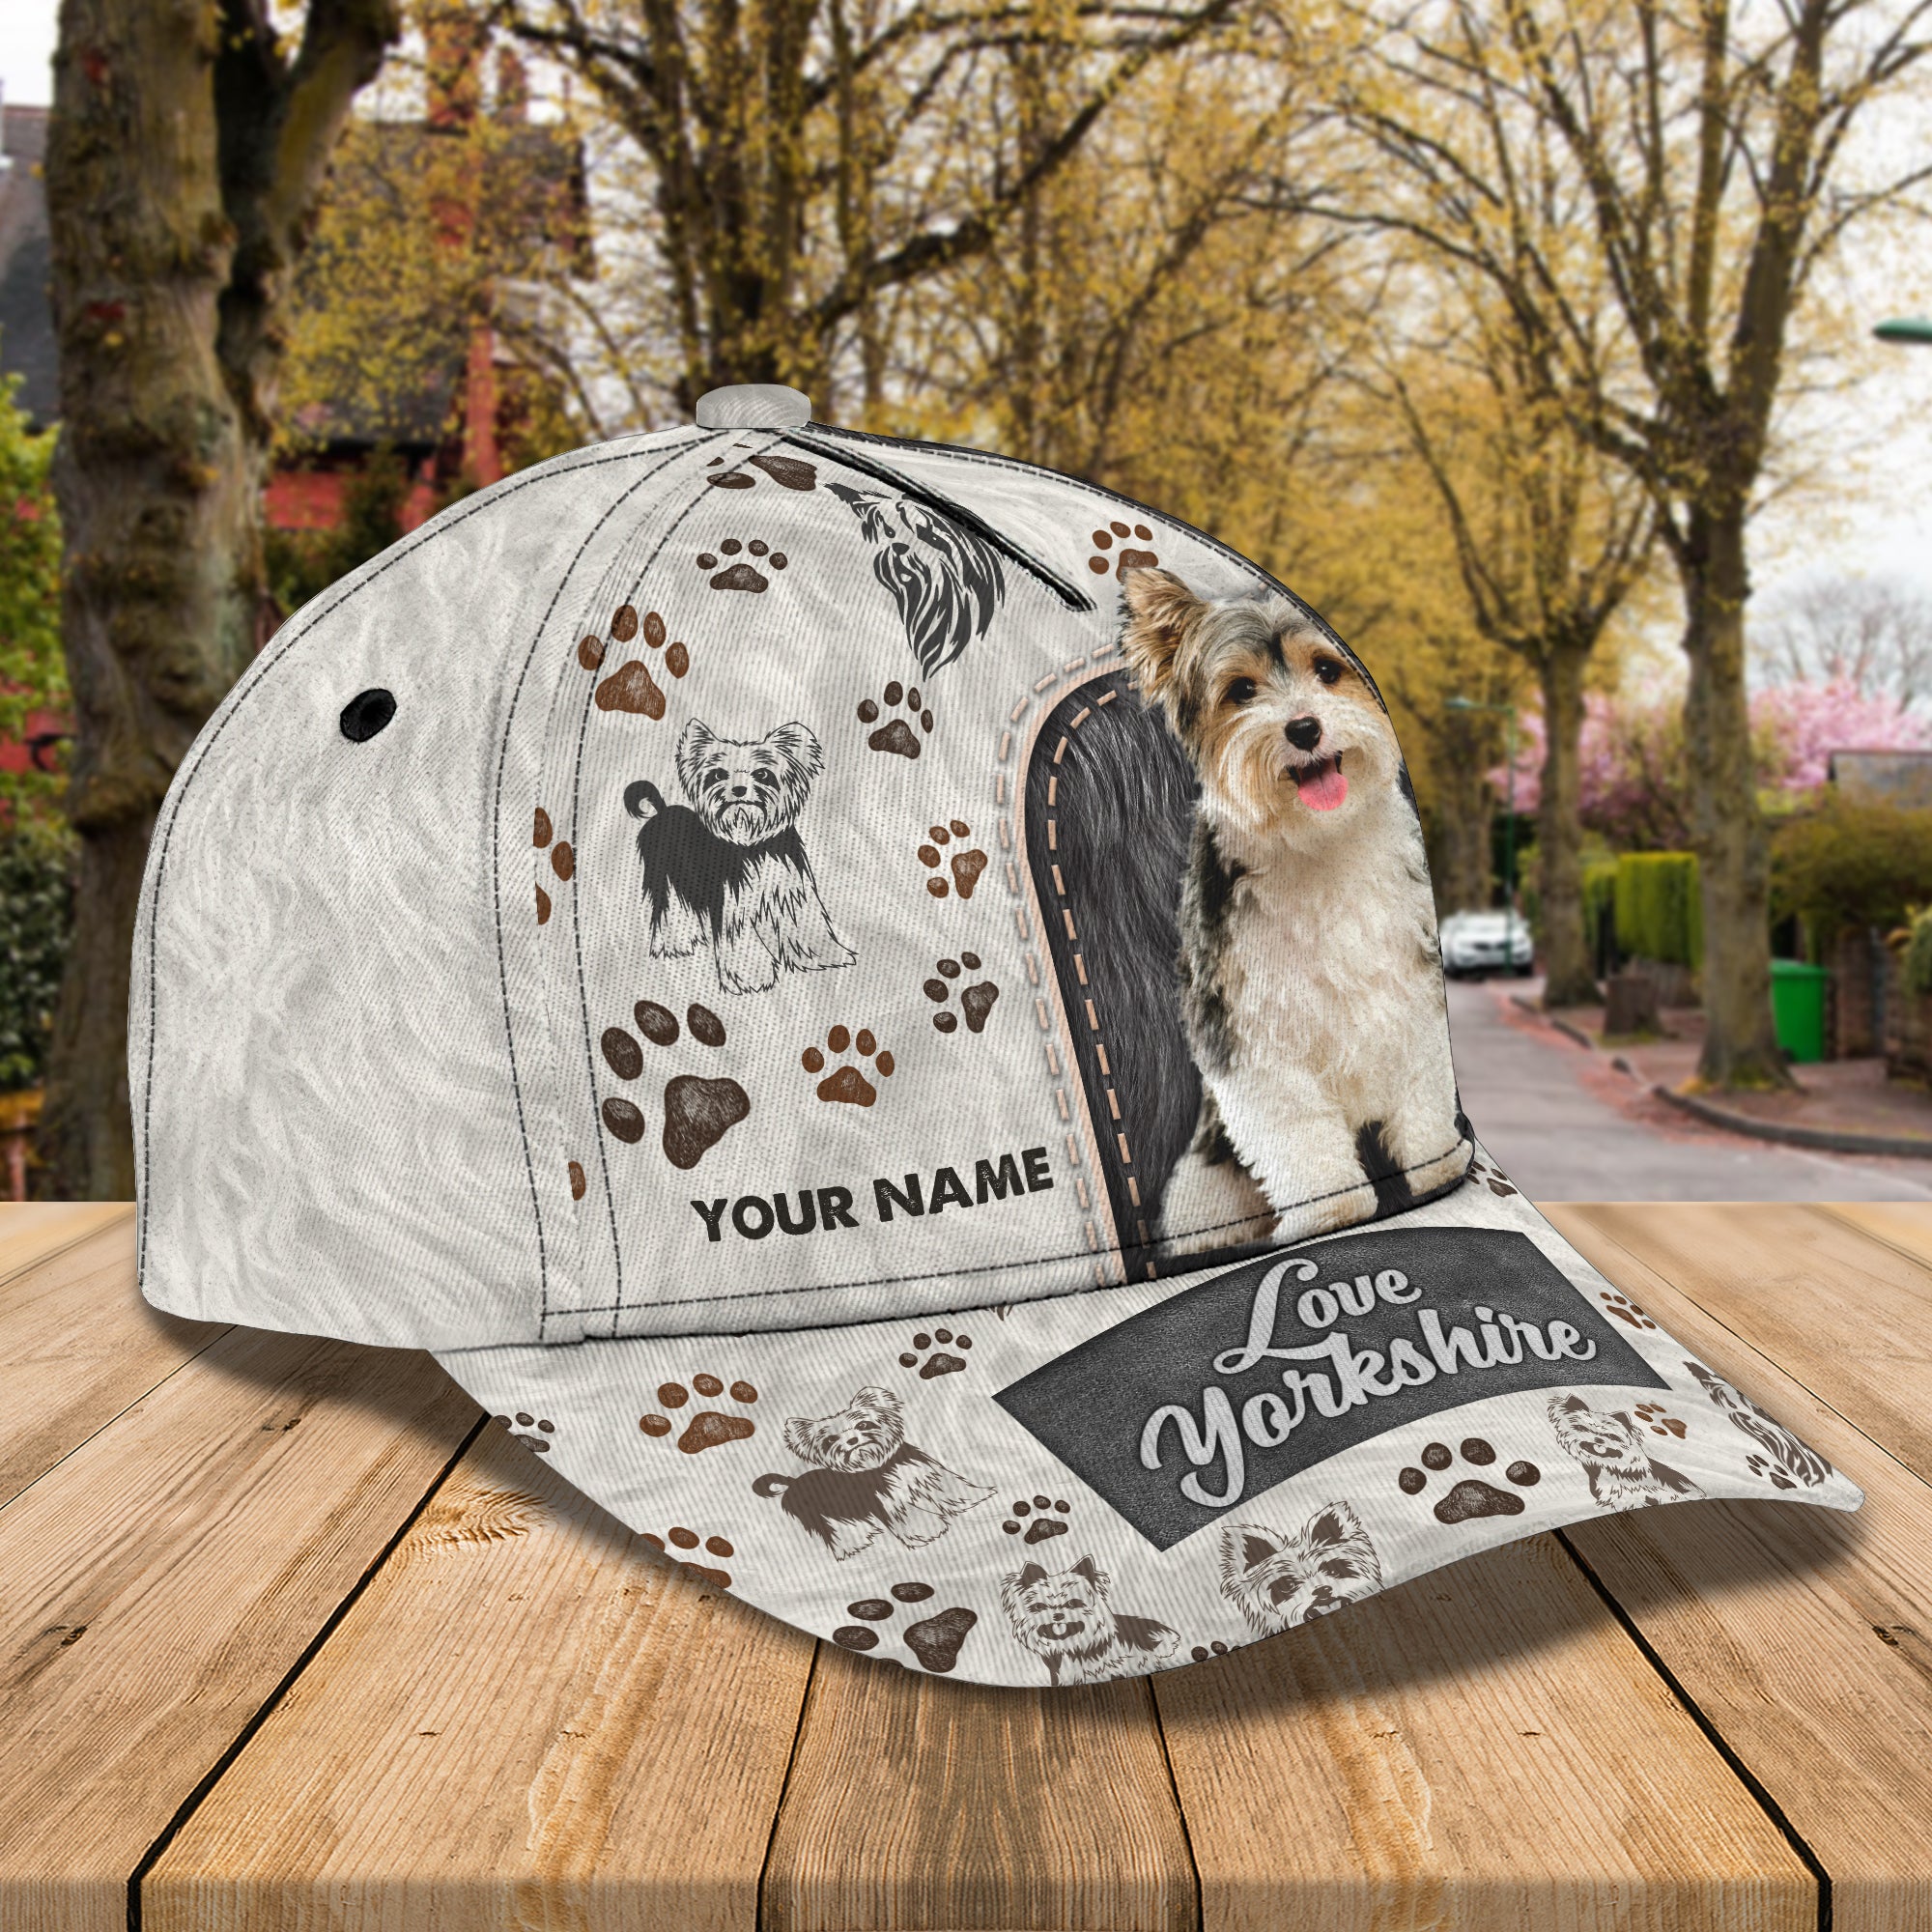 Yorkshire Lovers- Personalized Name Cap